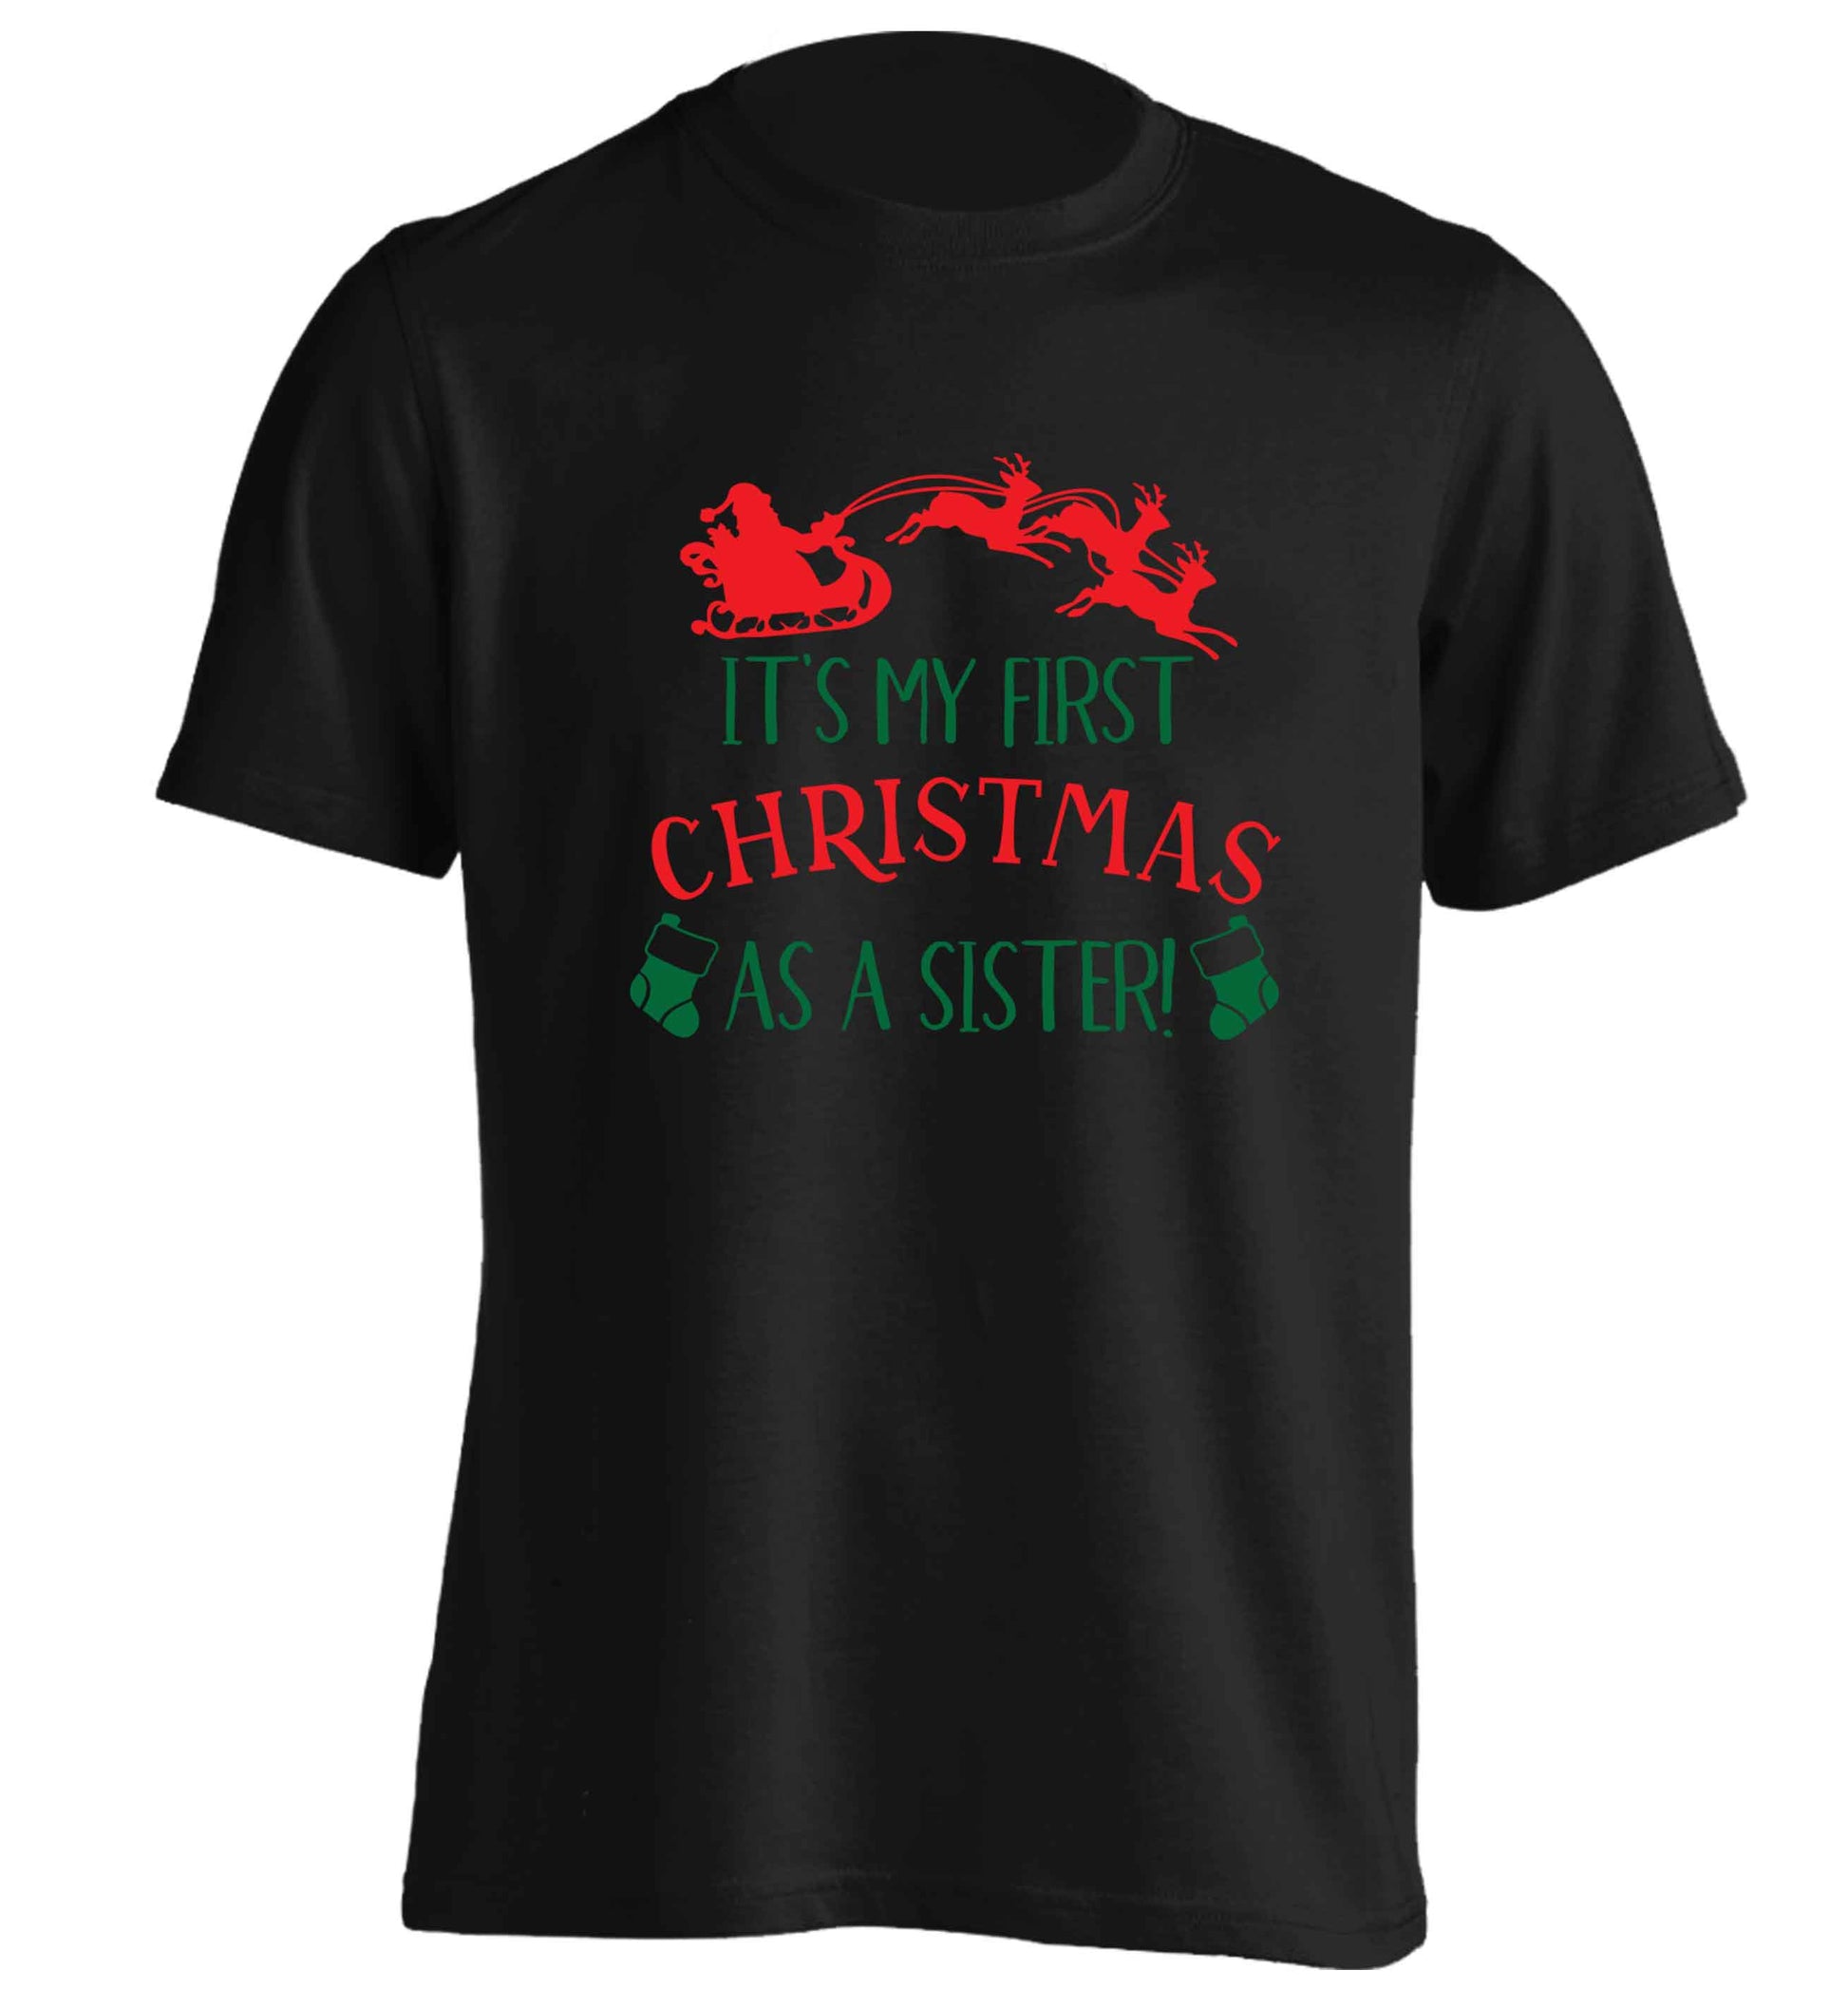 It's my first Christmas as a sister! adults unisex black Tshirt 2XL